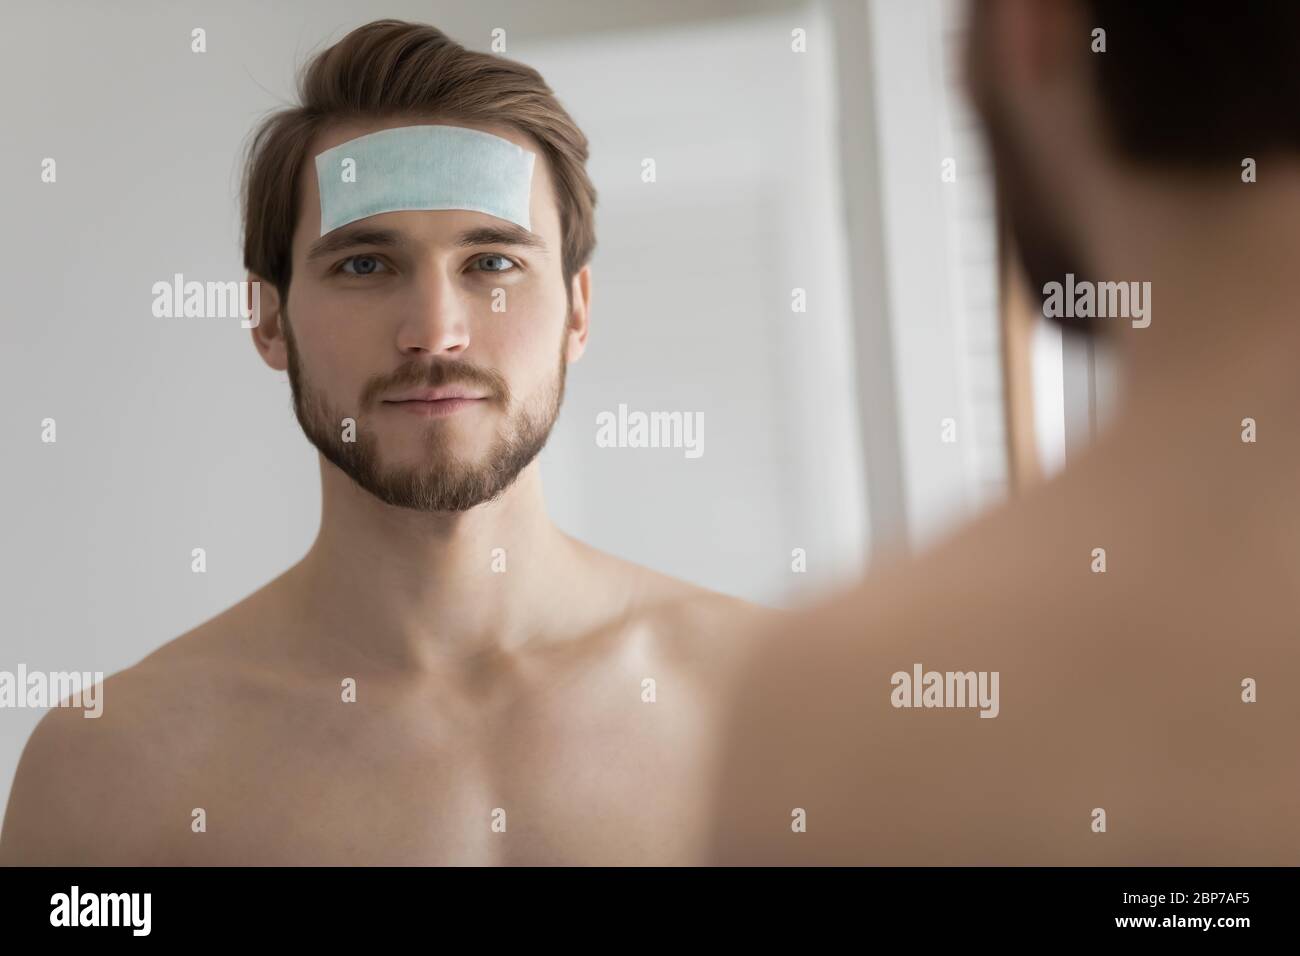 Portrait of young man use anti-wrinkle patch on forehead Stock Photo